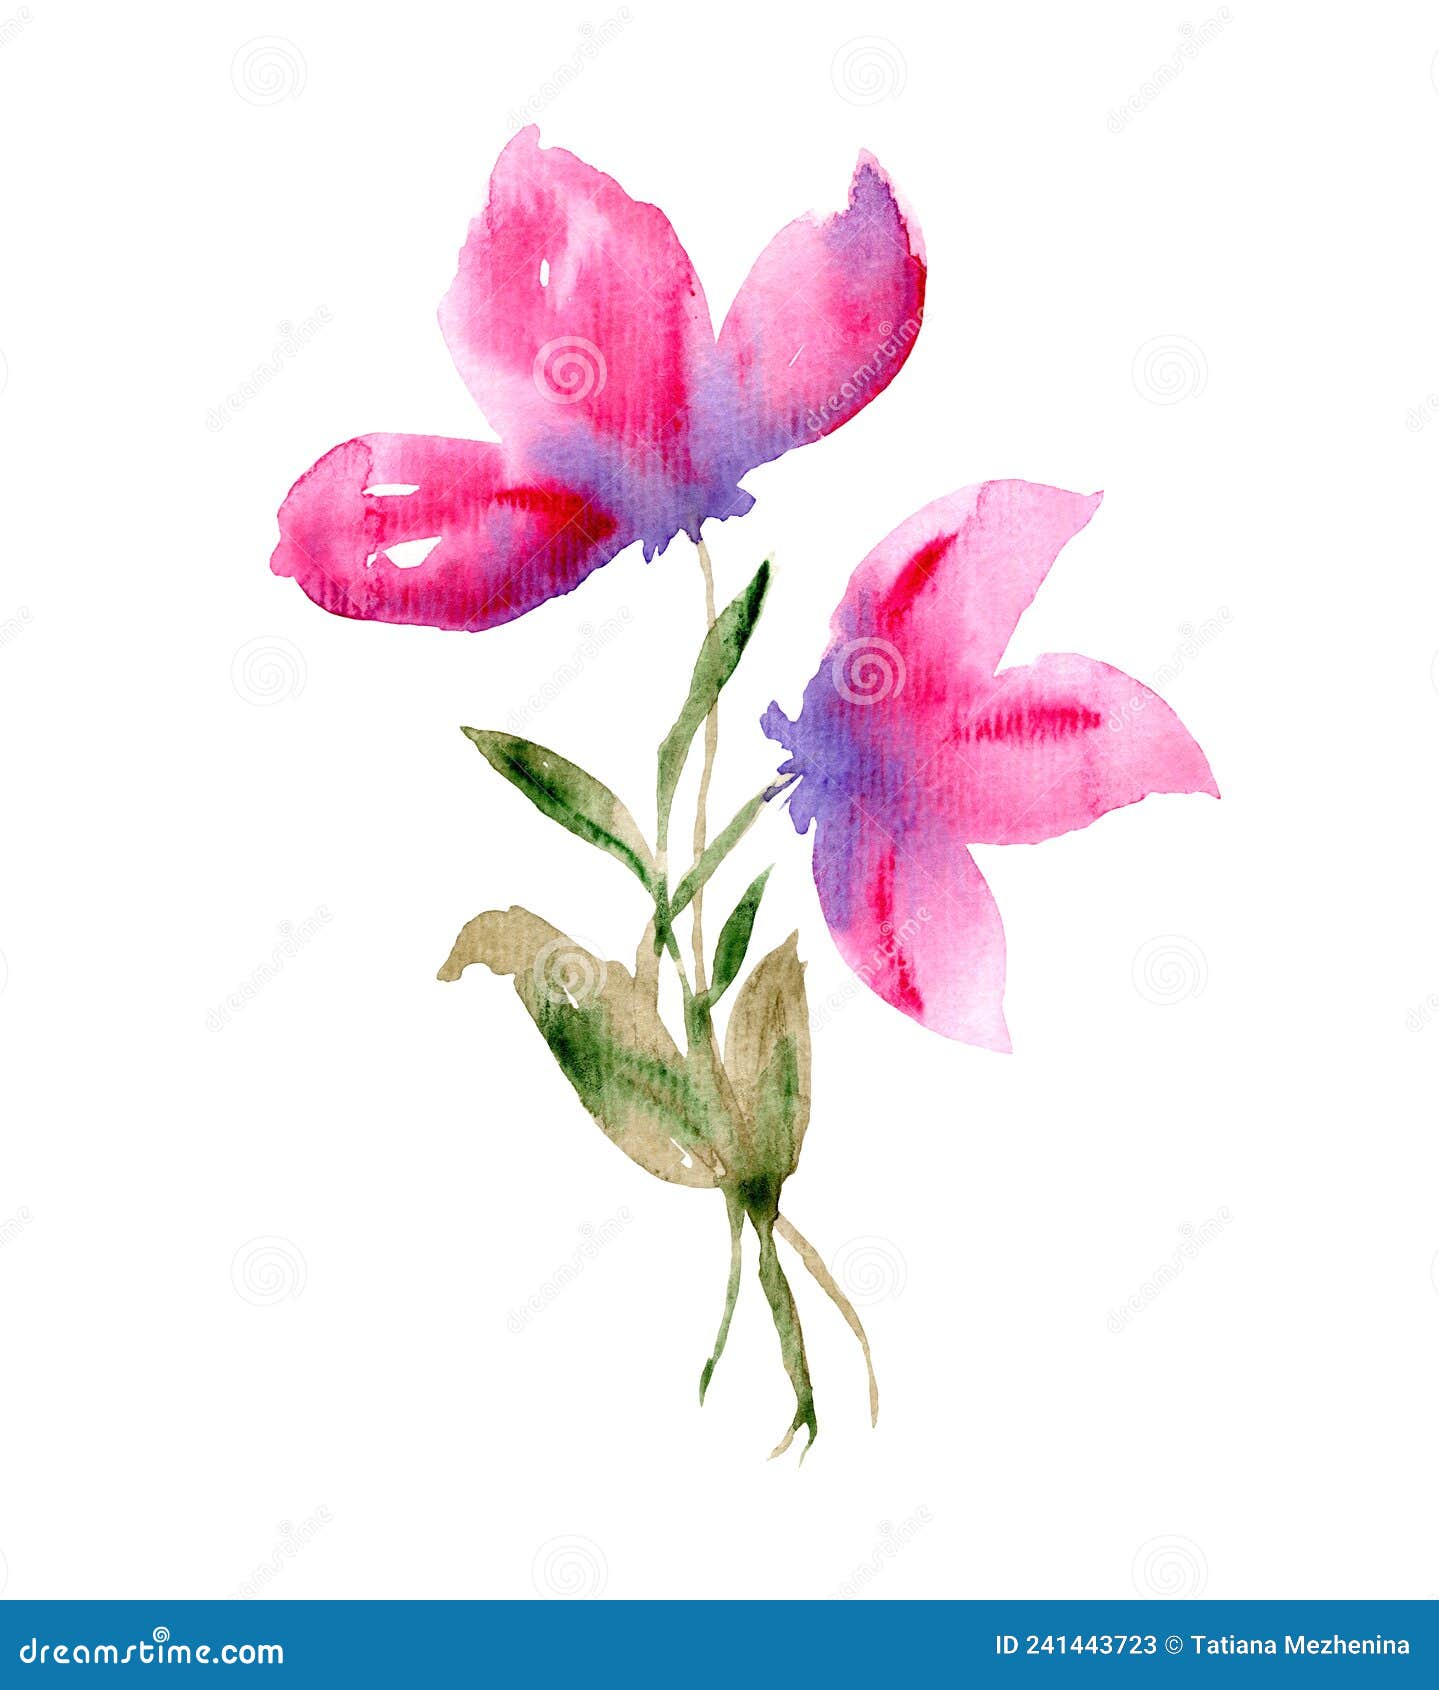 Delicate Watercolor Pink Flowers with Leaves Stock Image - Image of ...